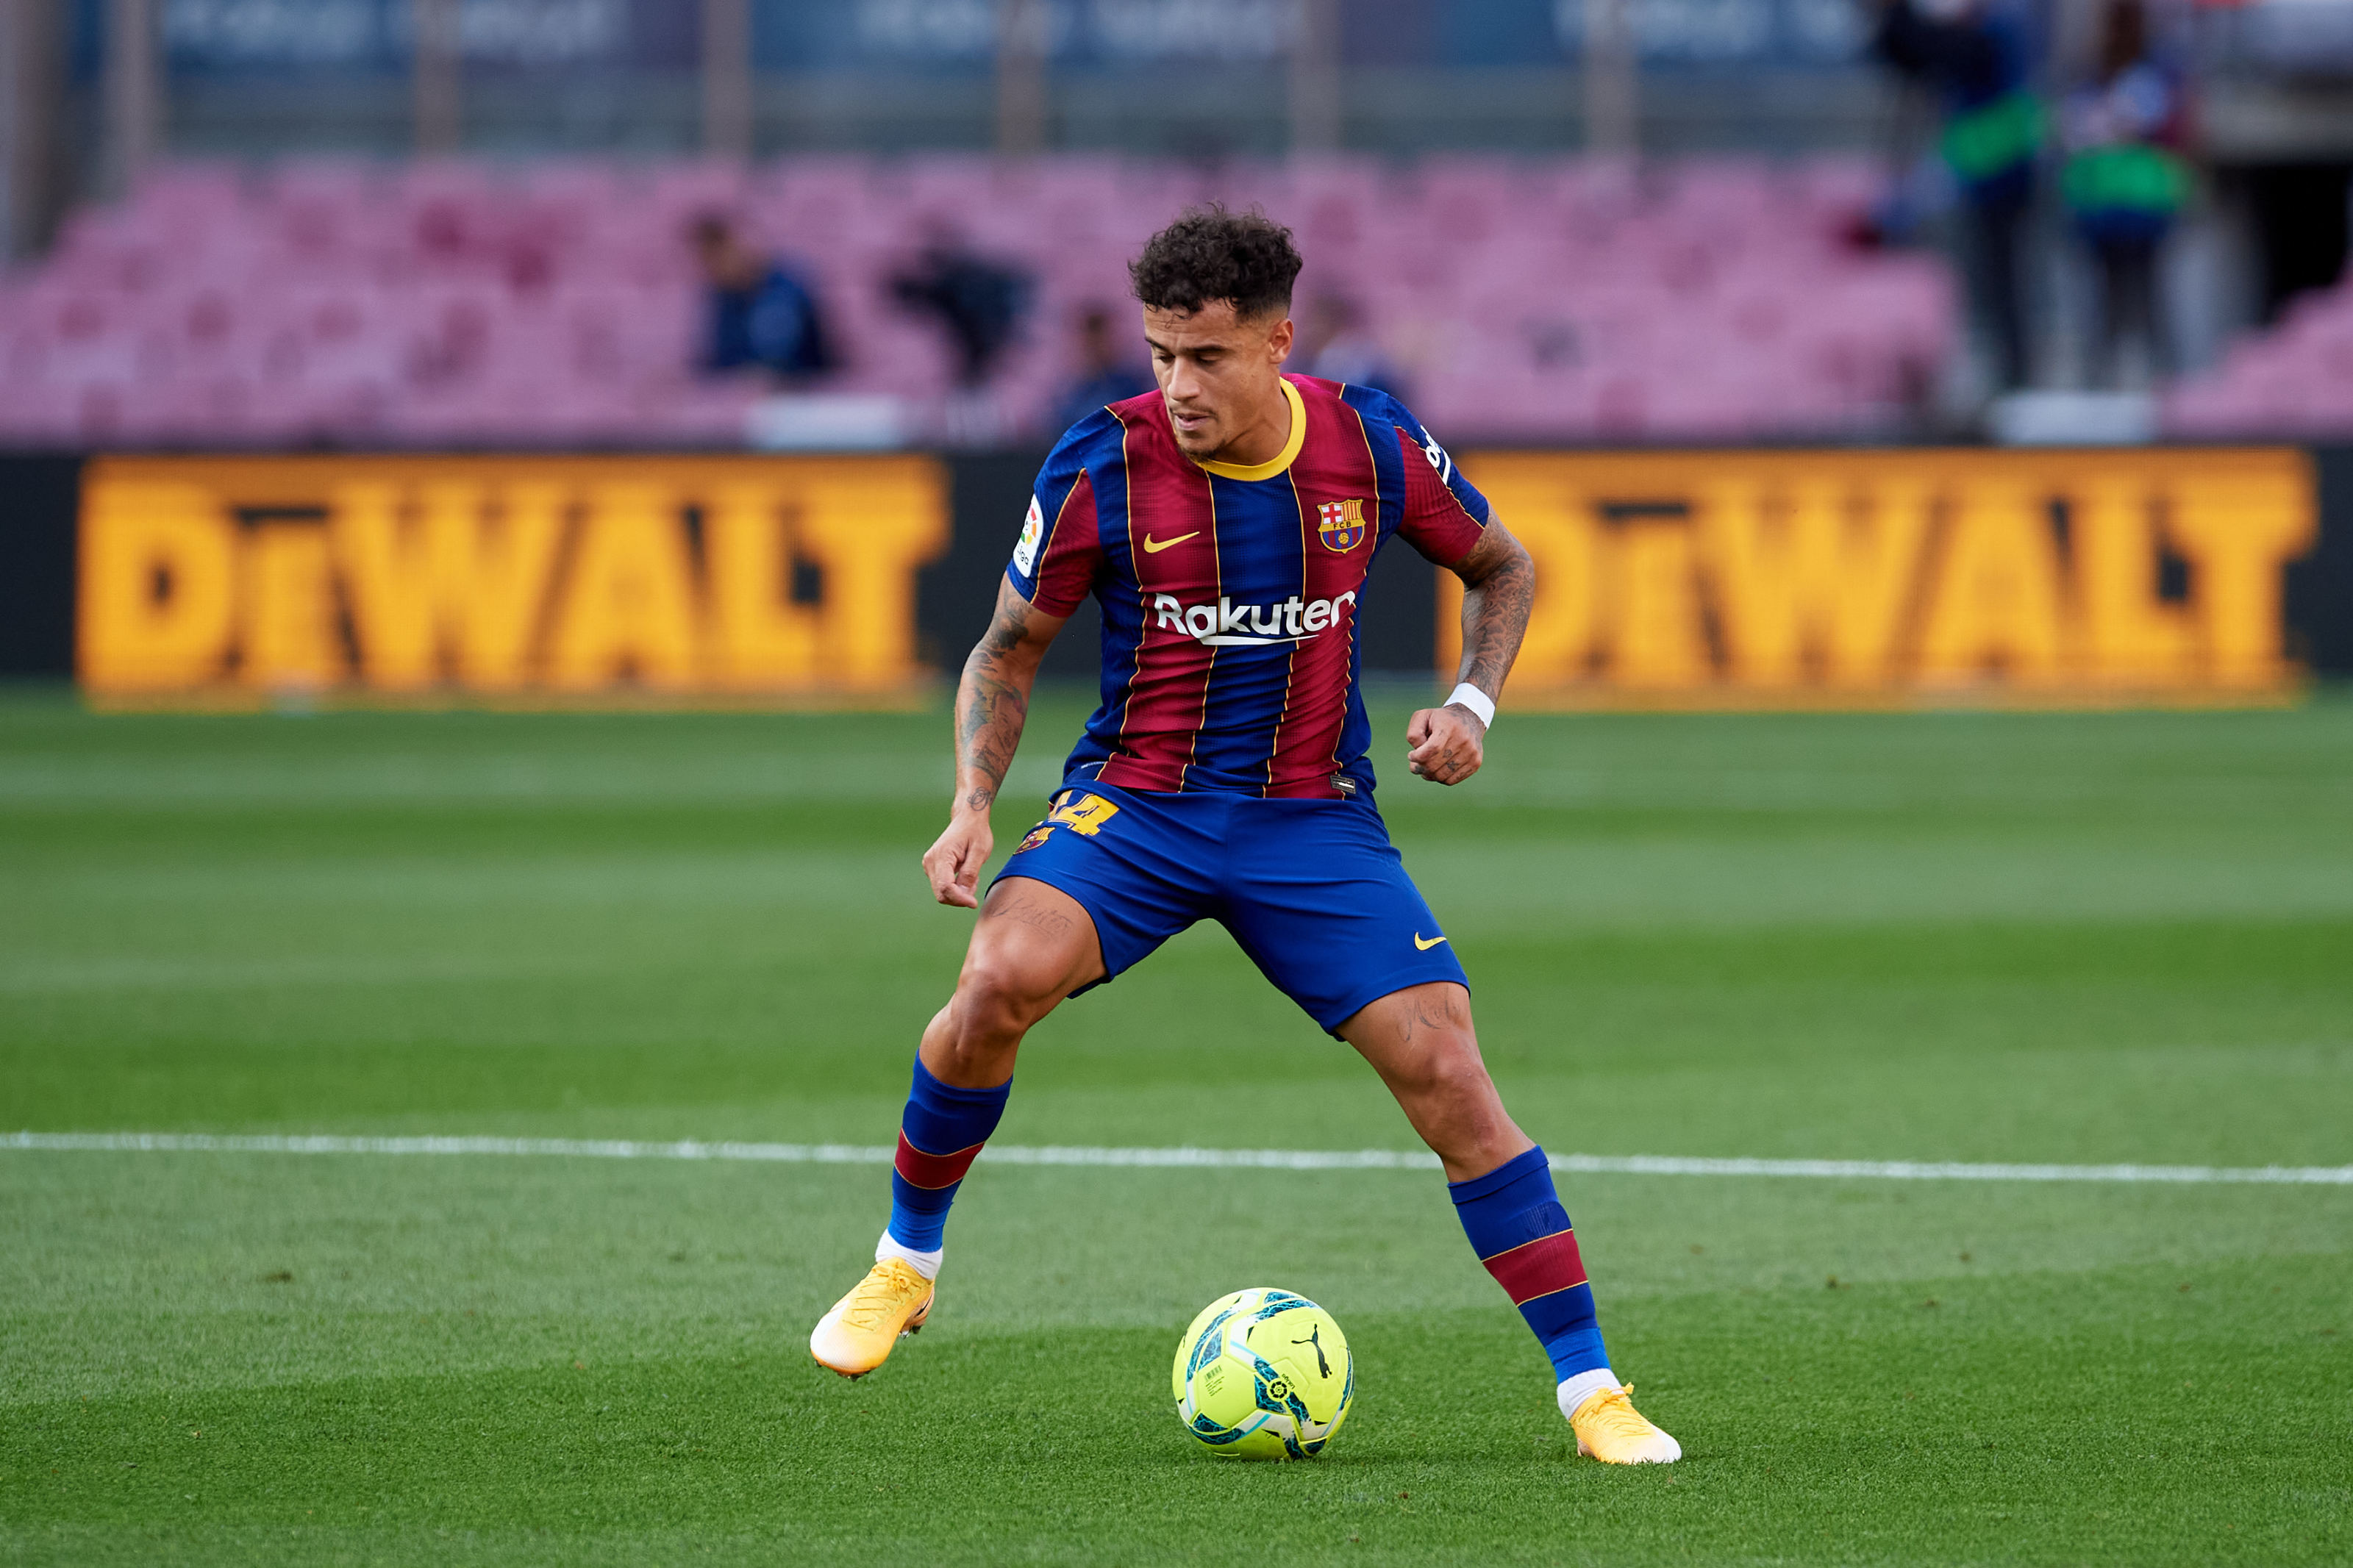 The Barca prodigy is more afraid of injury than ever